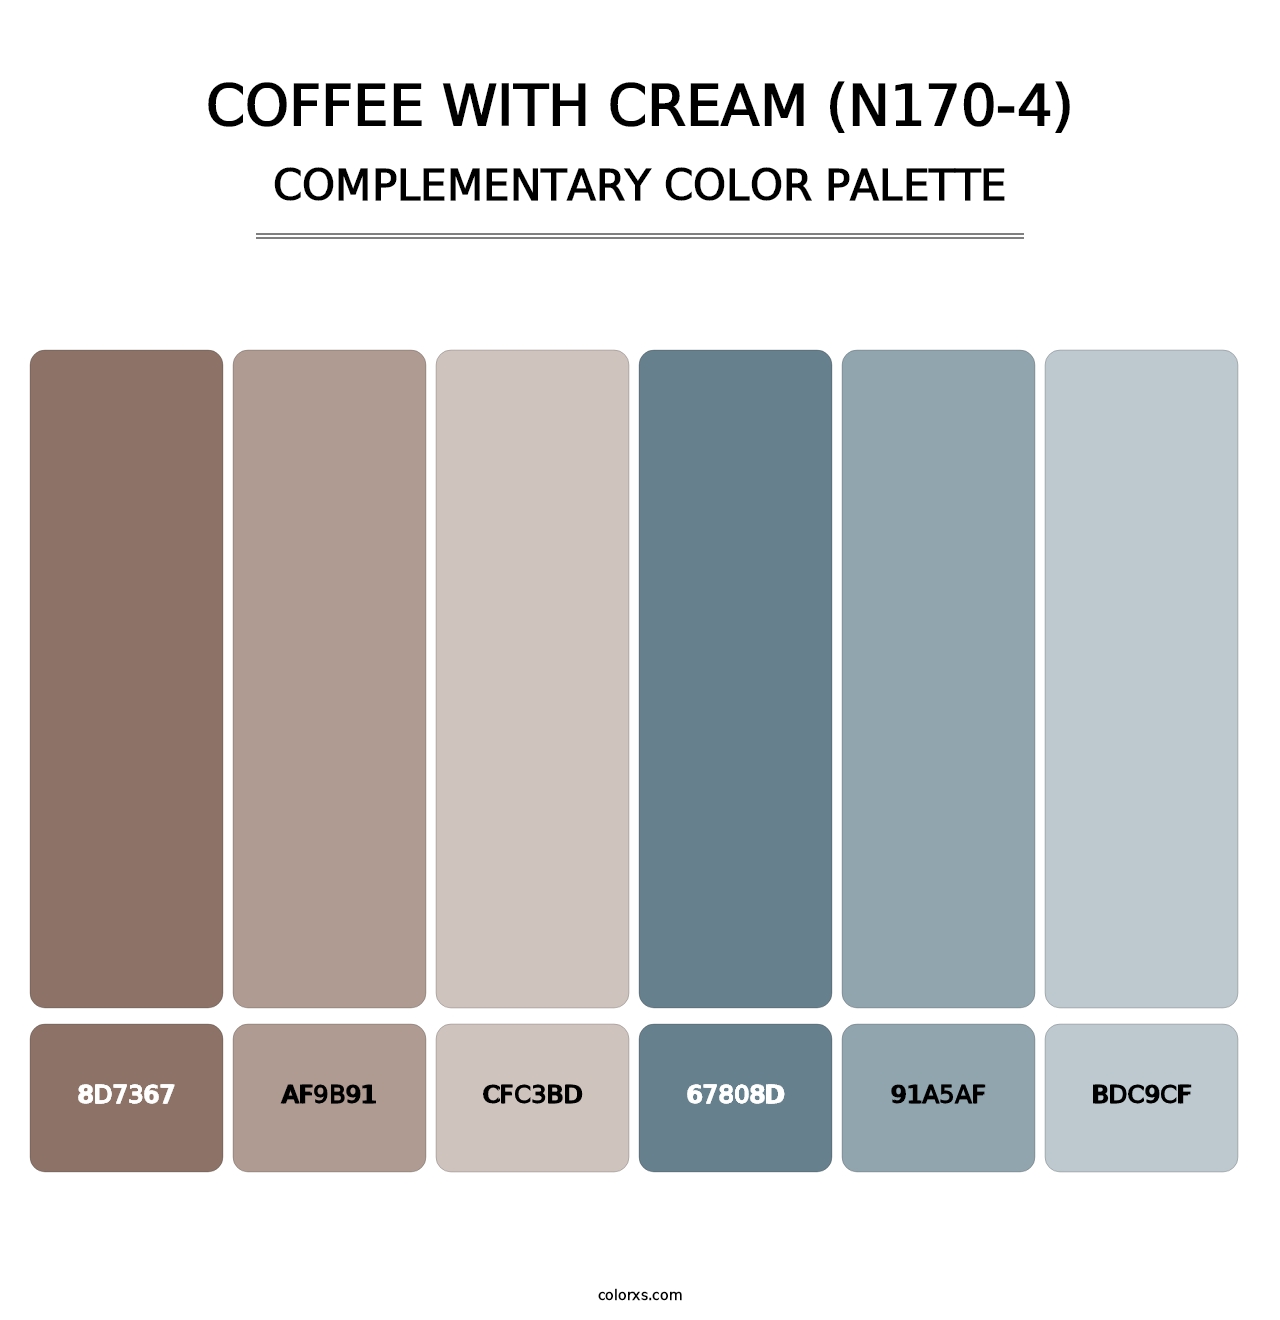 Coffee With Cream (N170-4) - Complementary Color Palette